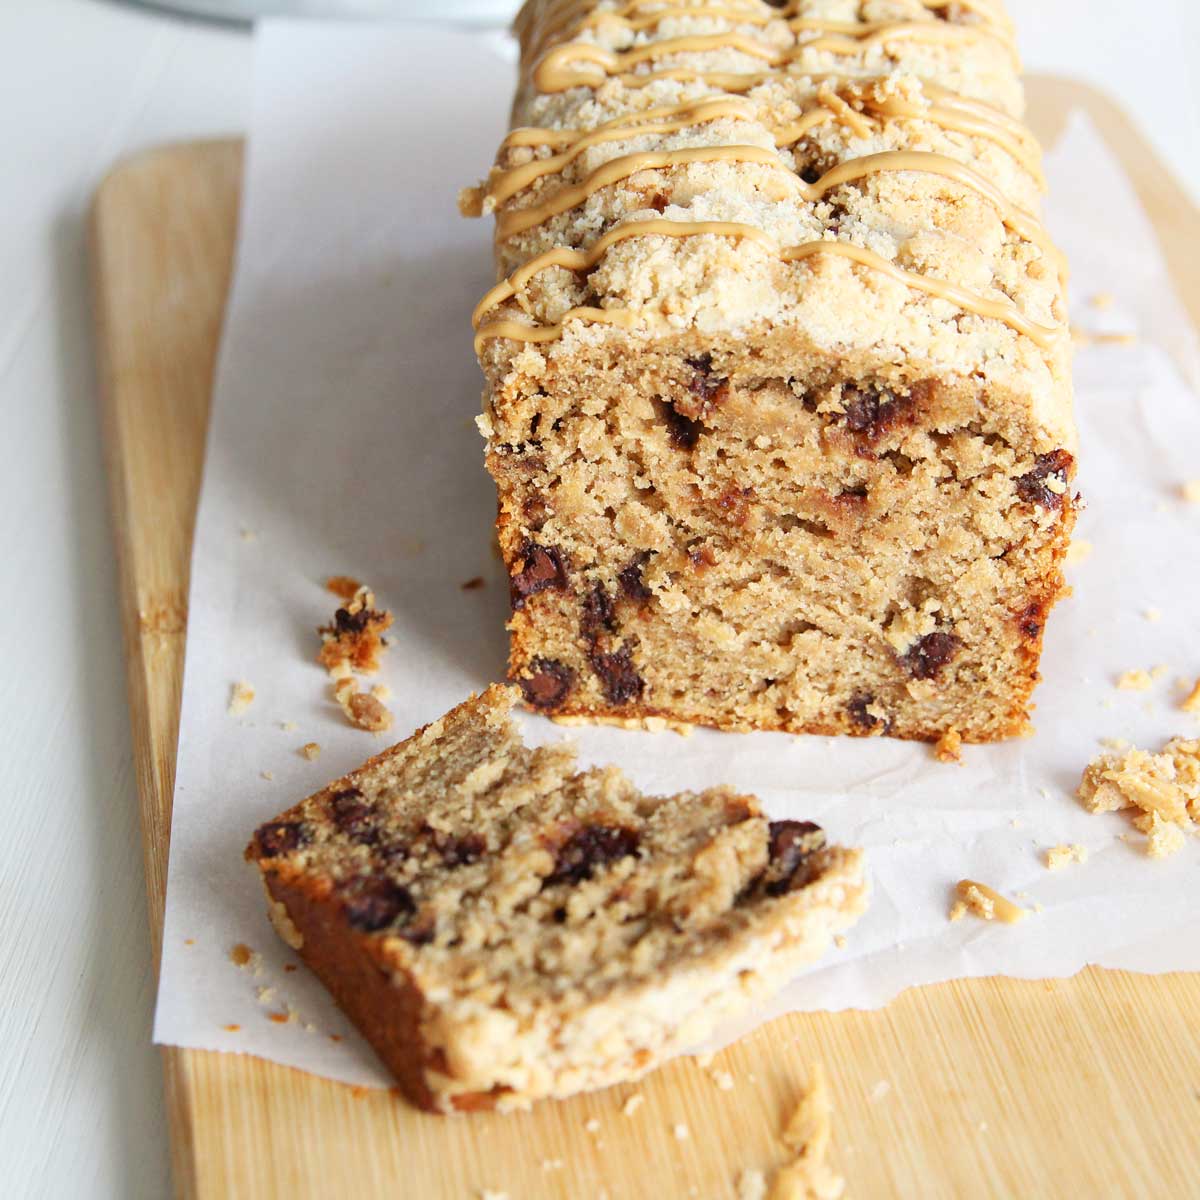 Coffee Lover's Chocolate Chip Banana Bread (No Eggs, Butter, or Dairy) - Birthday Cake Banana Bread